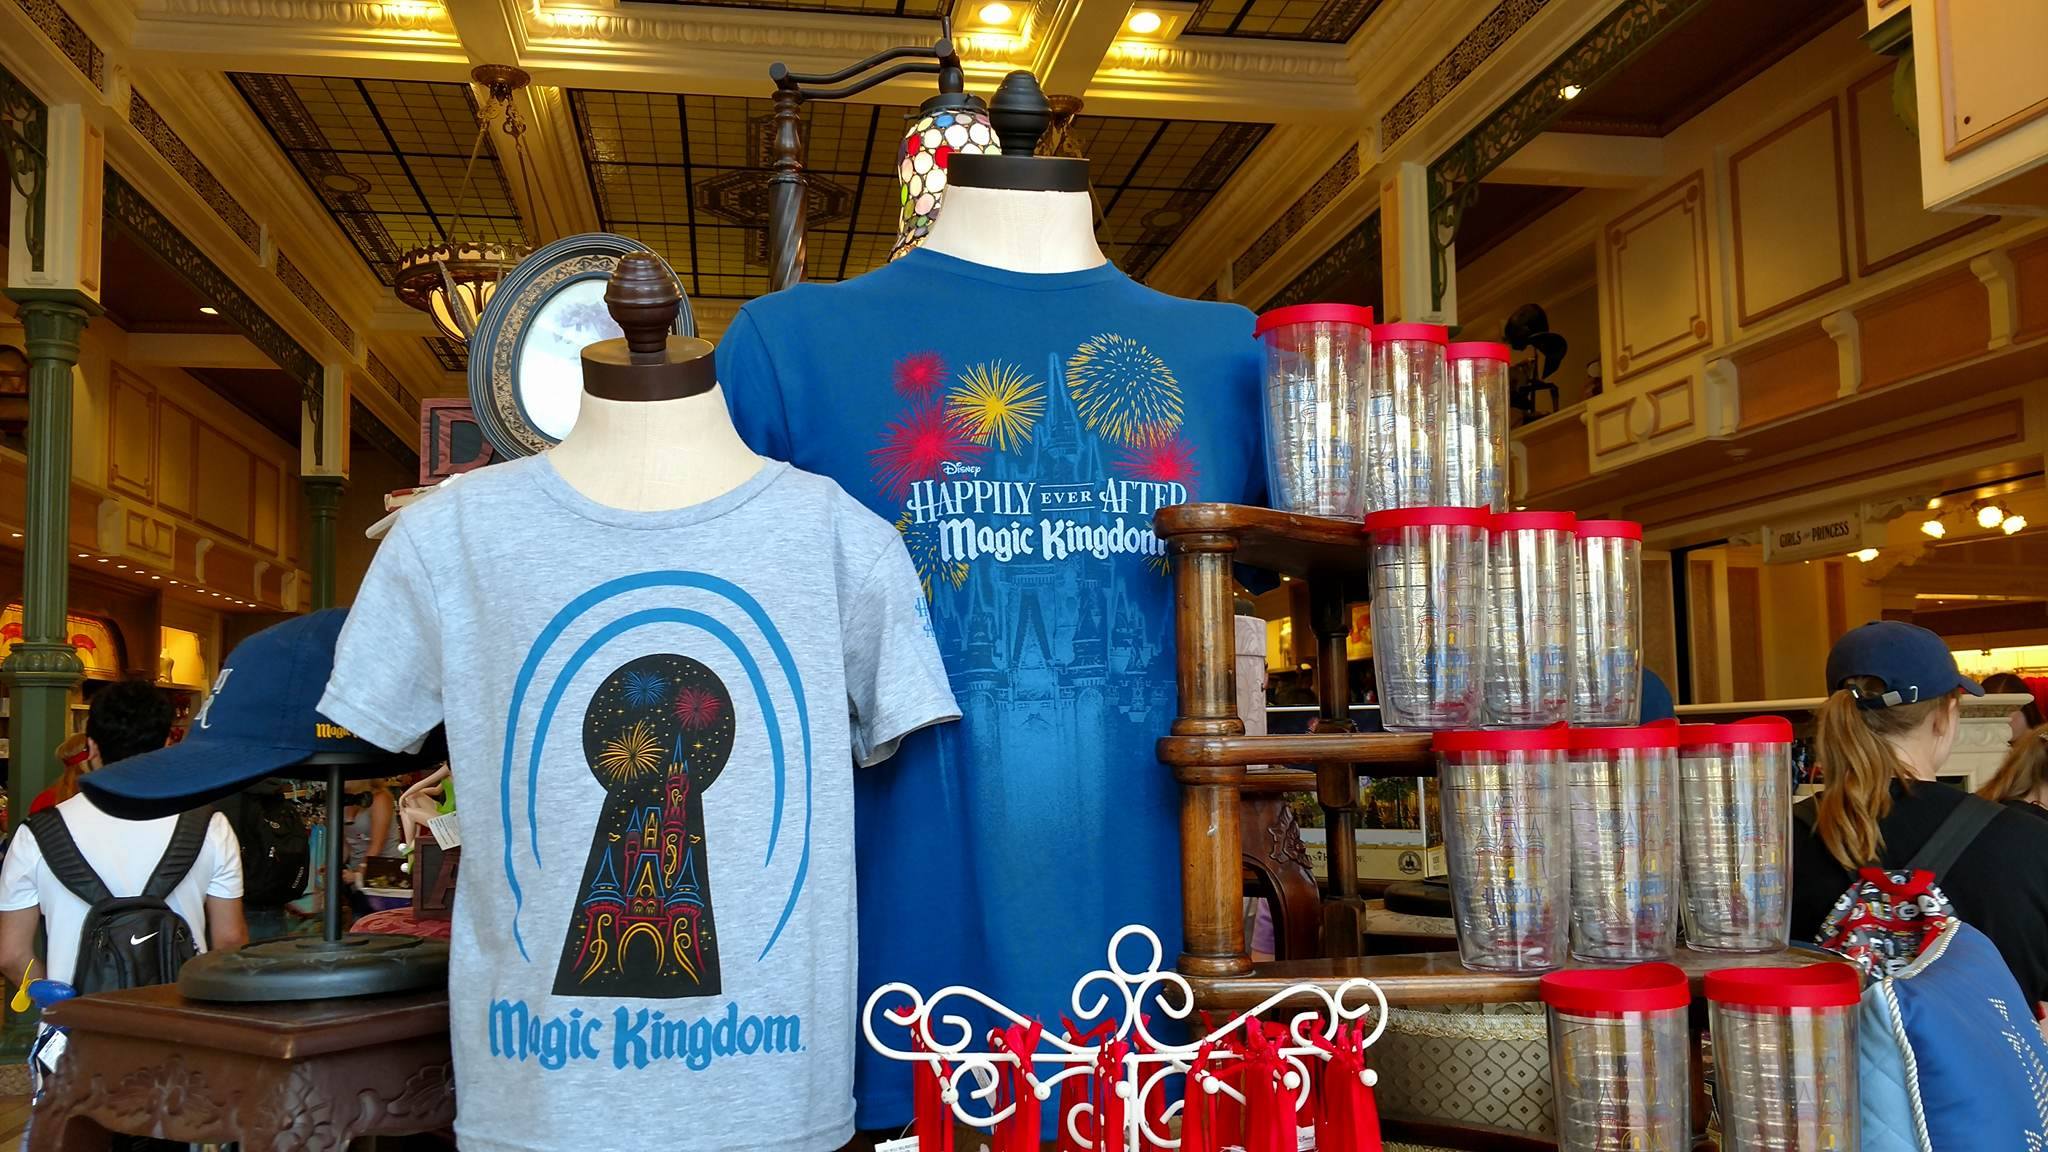 New “Happily Ever After” Merchandise Being Offered at The Magic Kingdom